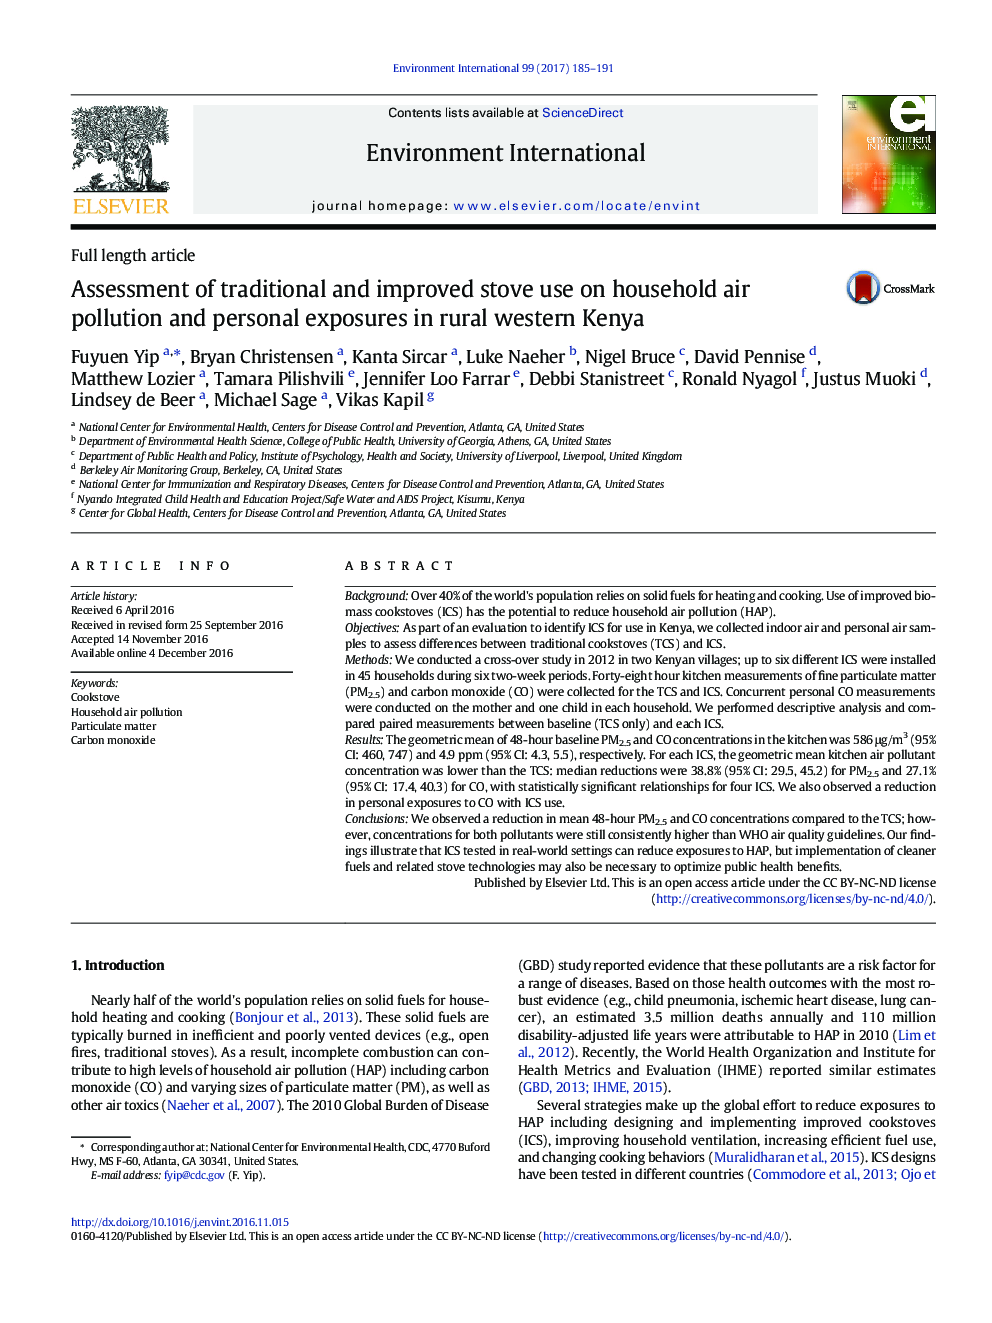 Full length articleAssessment of traditional and improved stove use on household air pollution and personal exposures in rural western Kenya